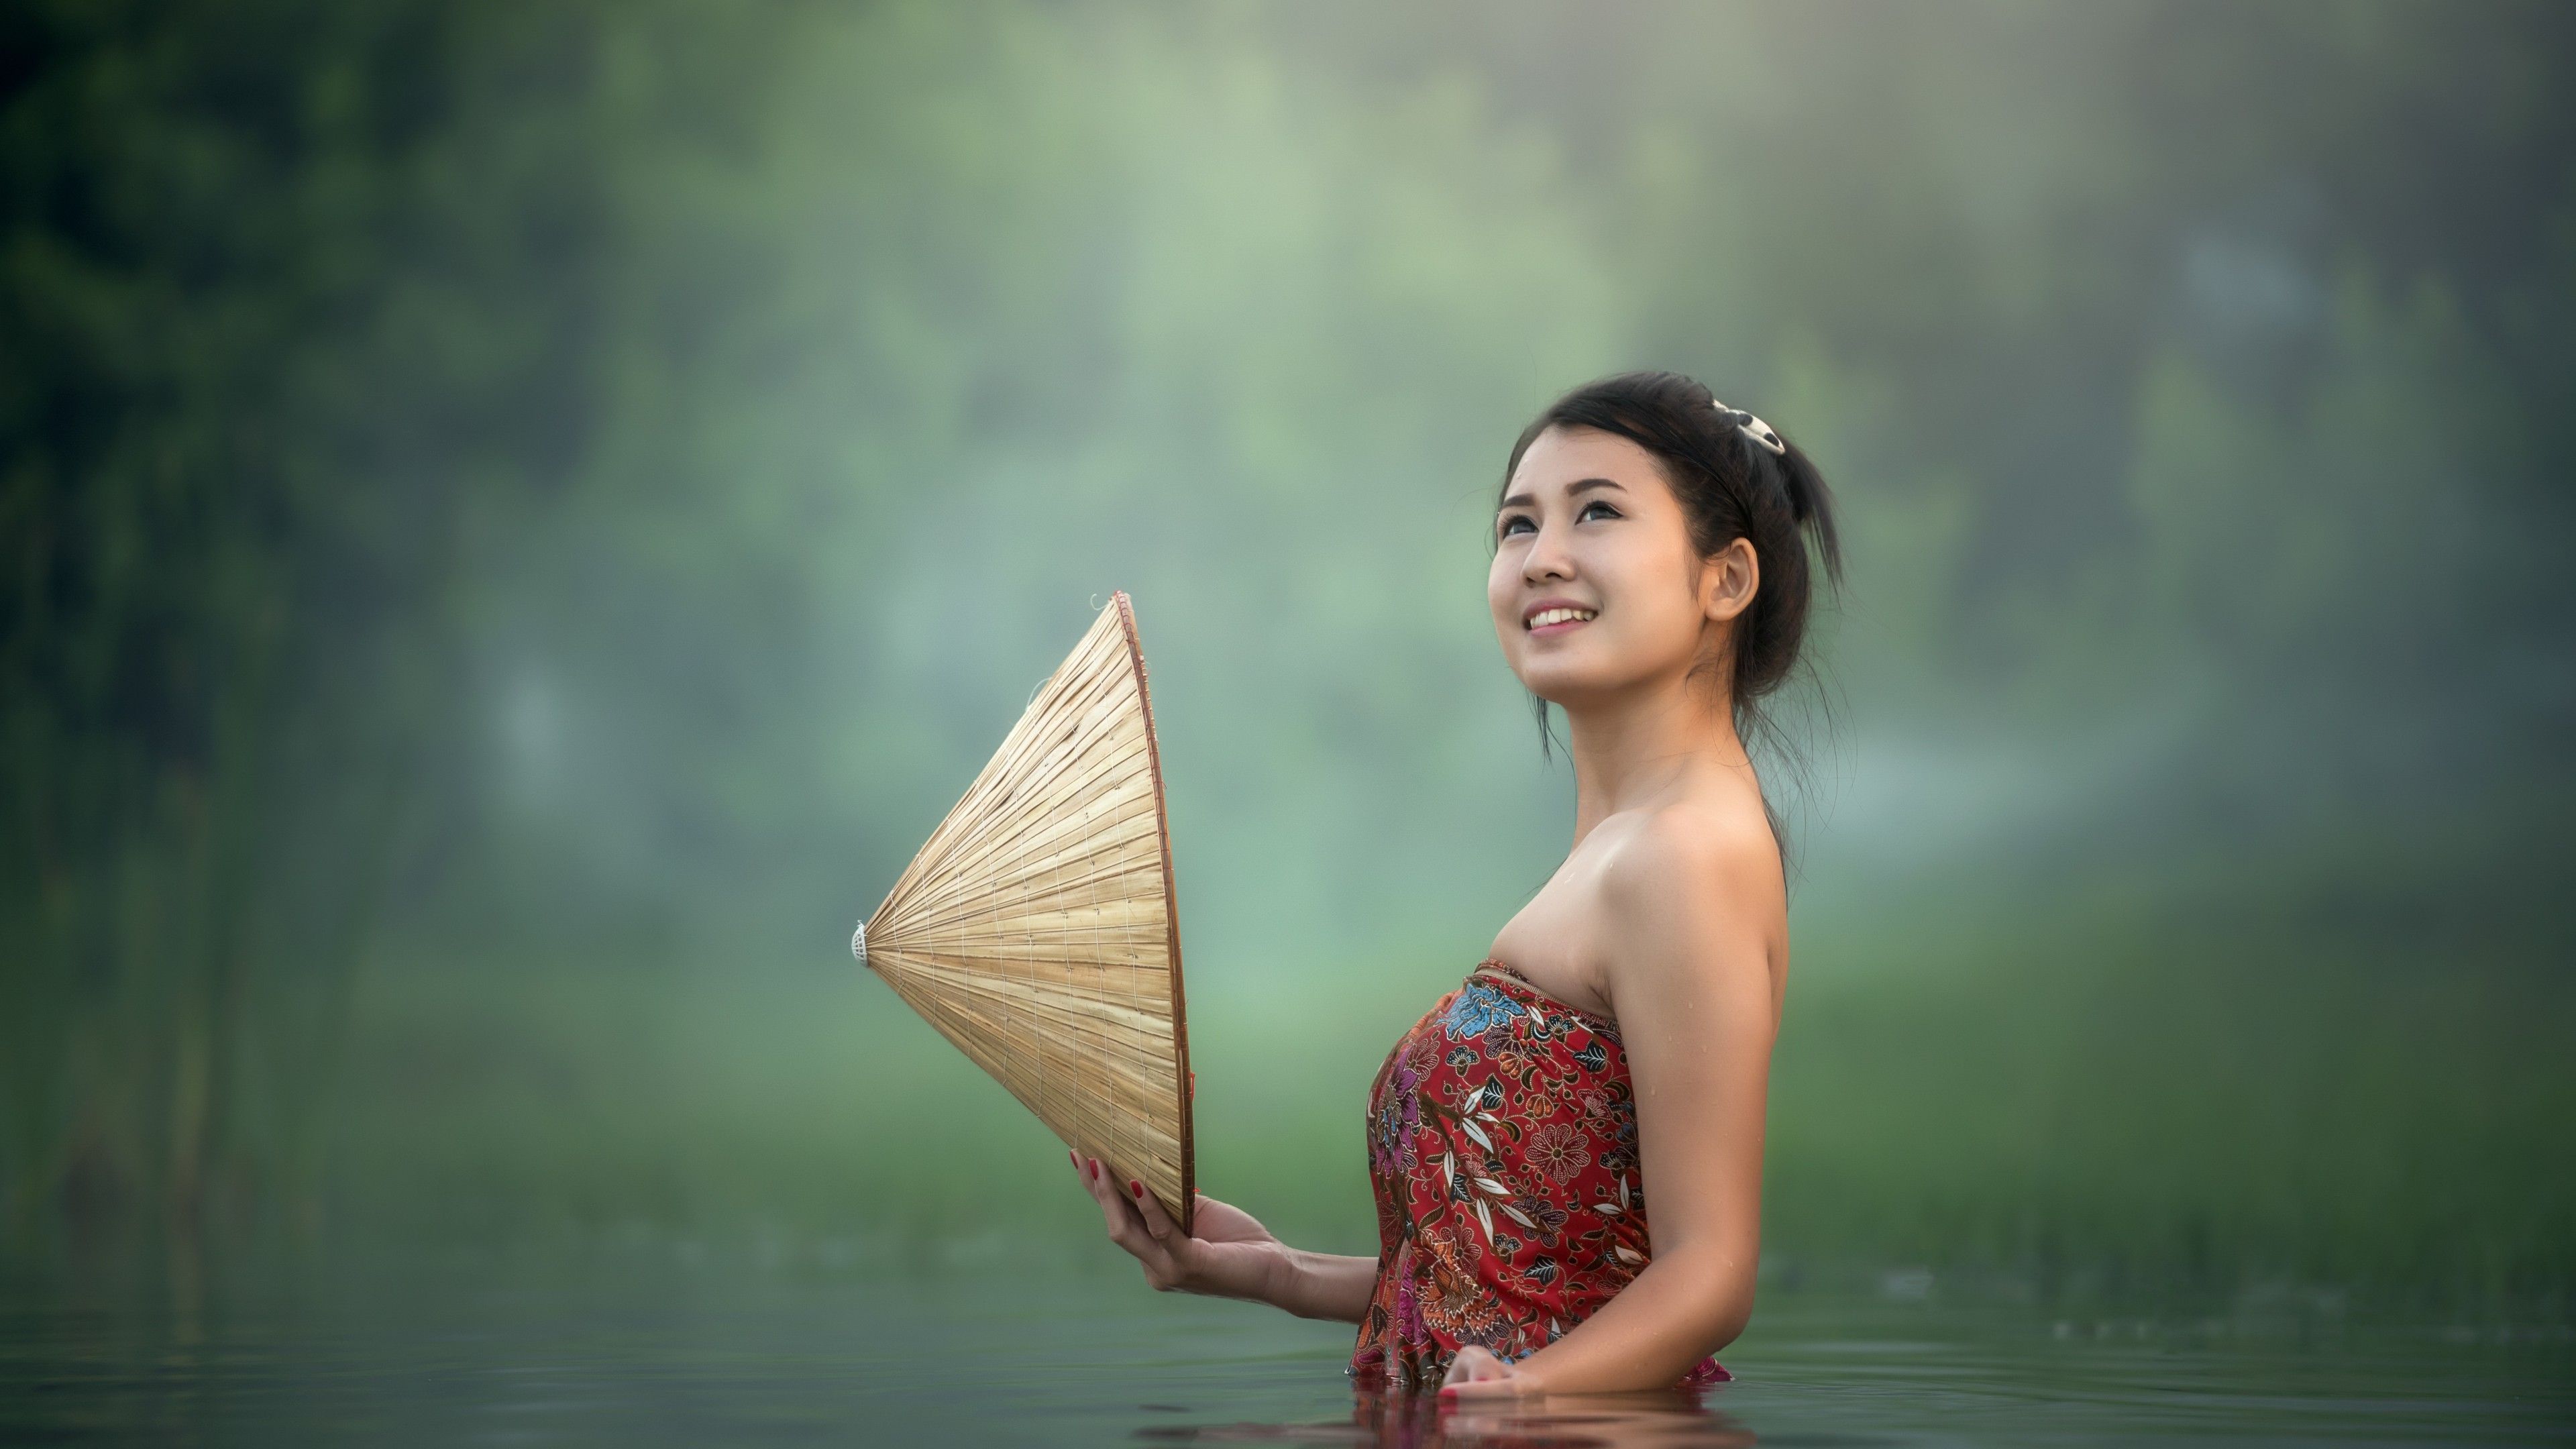 Wallpaper Asian girl, Beautiful girl, Youth, Teen girl, 4K, 8K, Photography,. Wallpaper for iPhone, Android, Mobile and Desktop